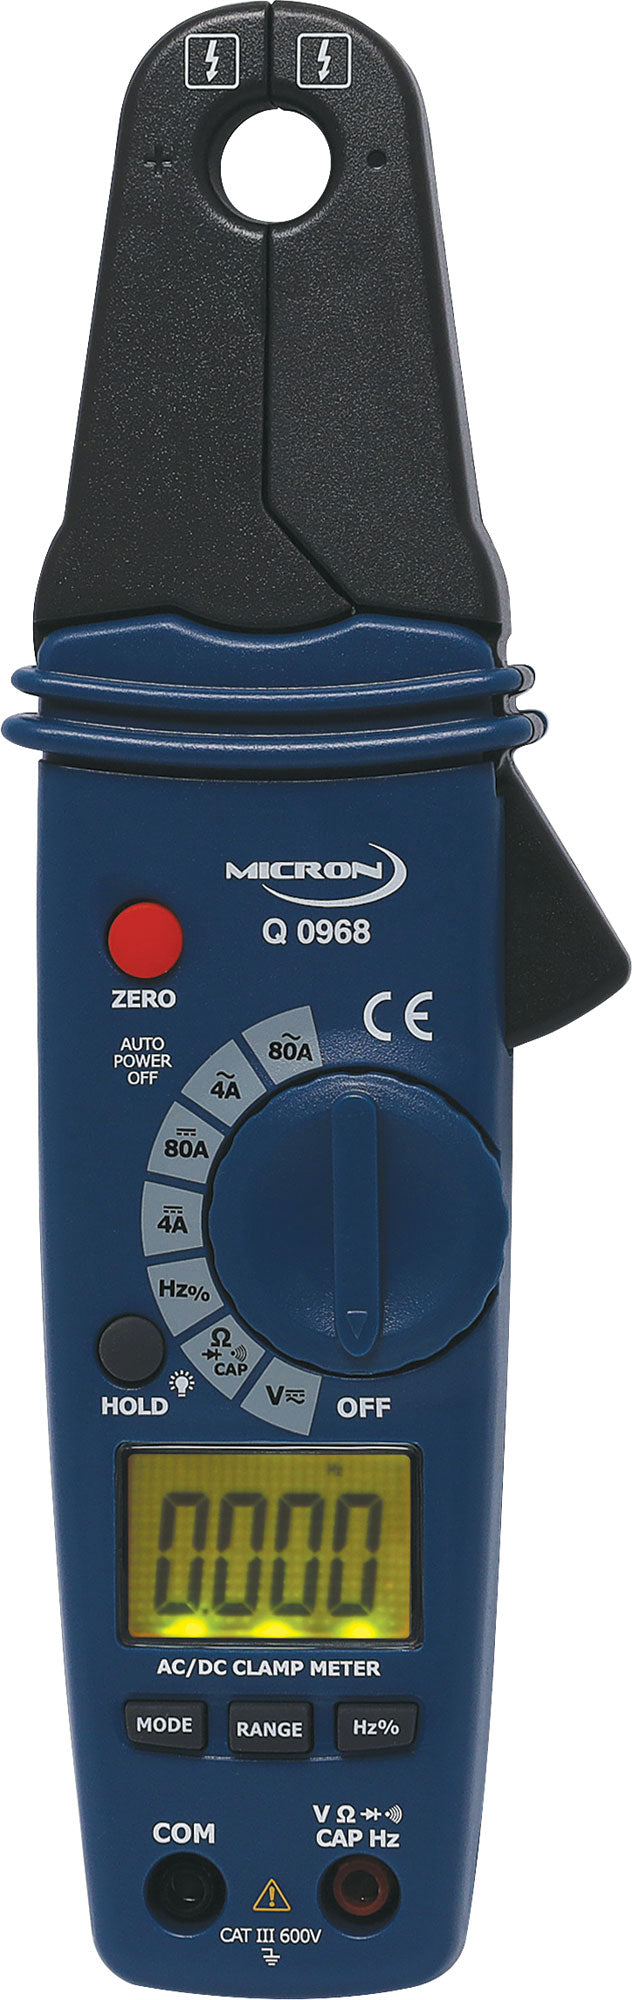 Compact AC/DC Clamp Meter Q0968